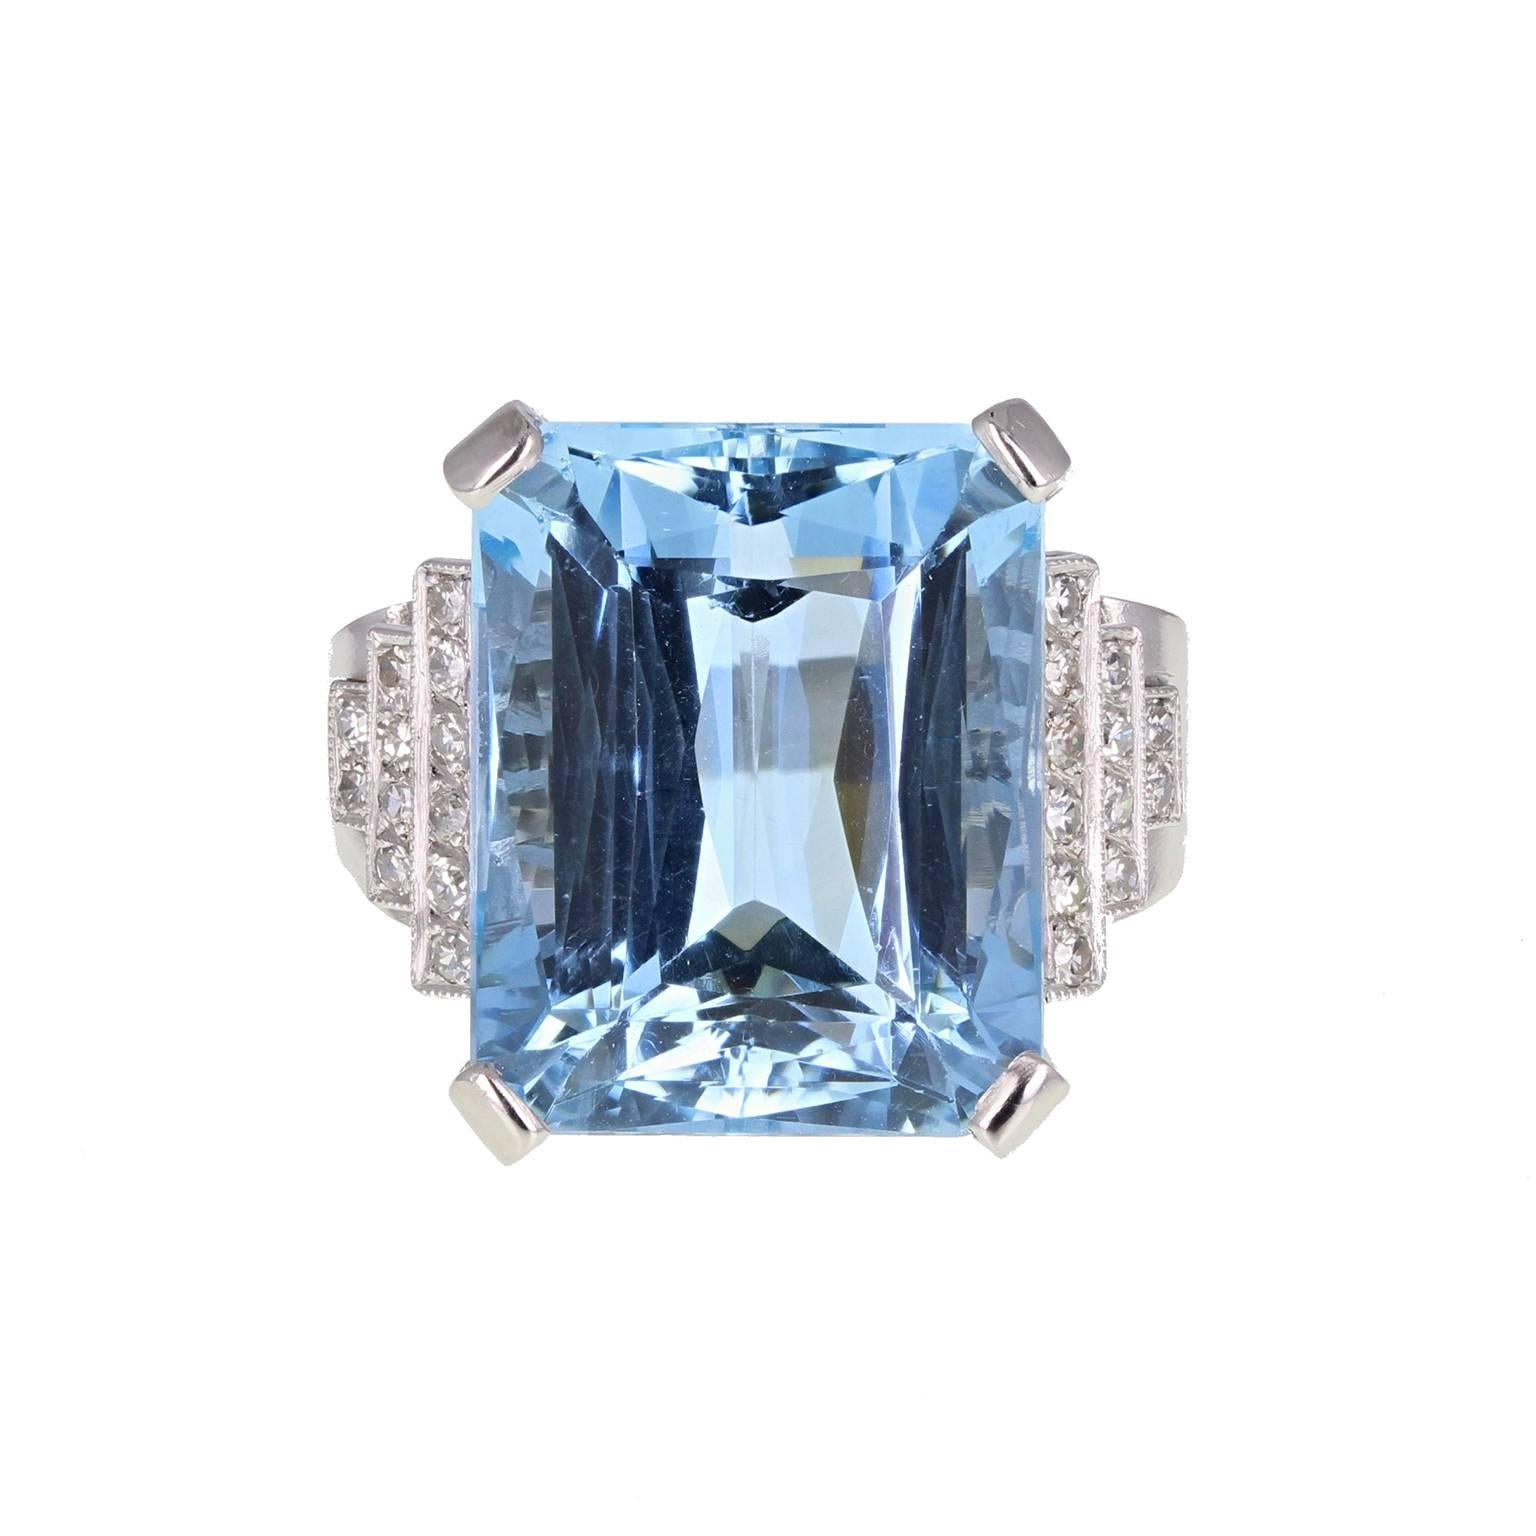 A very fine quality Art Deco ring featuring a central 28 carat radiant-cut aquamarine of exceptional colour, mounted in four claws. Triple stepped shoulders, pavé-set with single-cut diamonds. Pierced scroll work to the underside of the setting. An